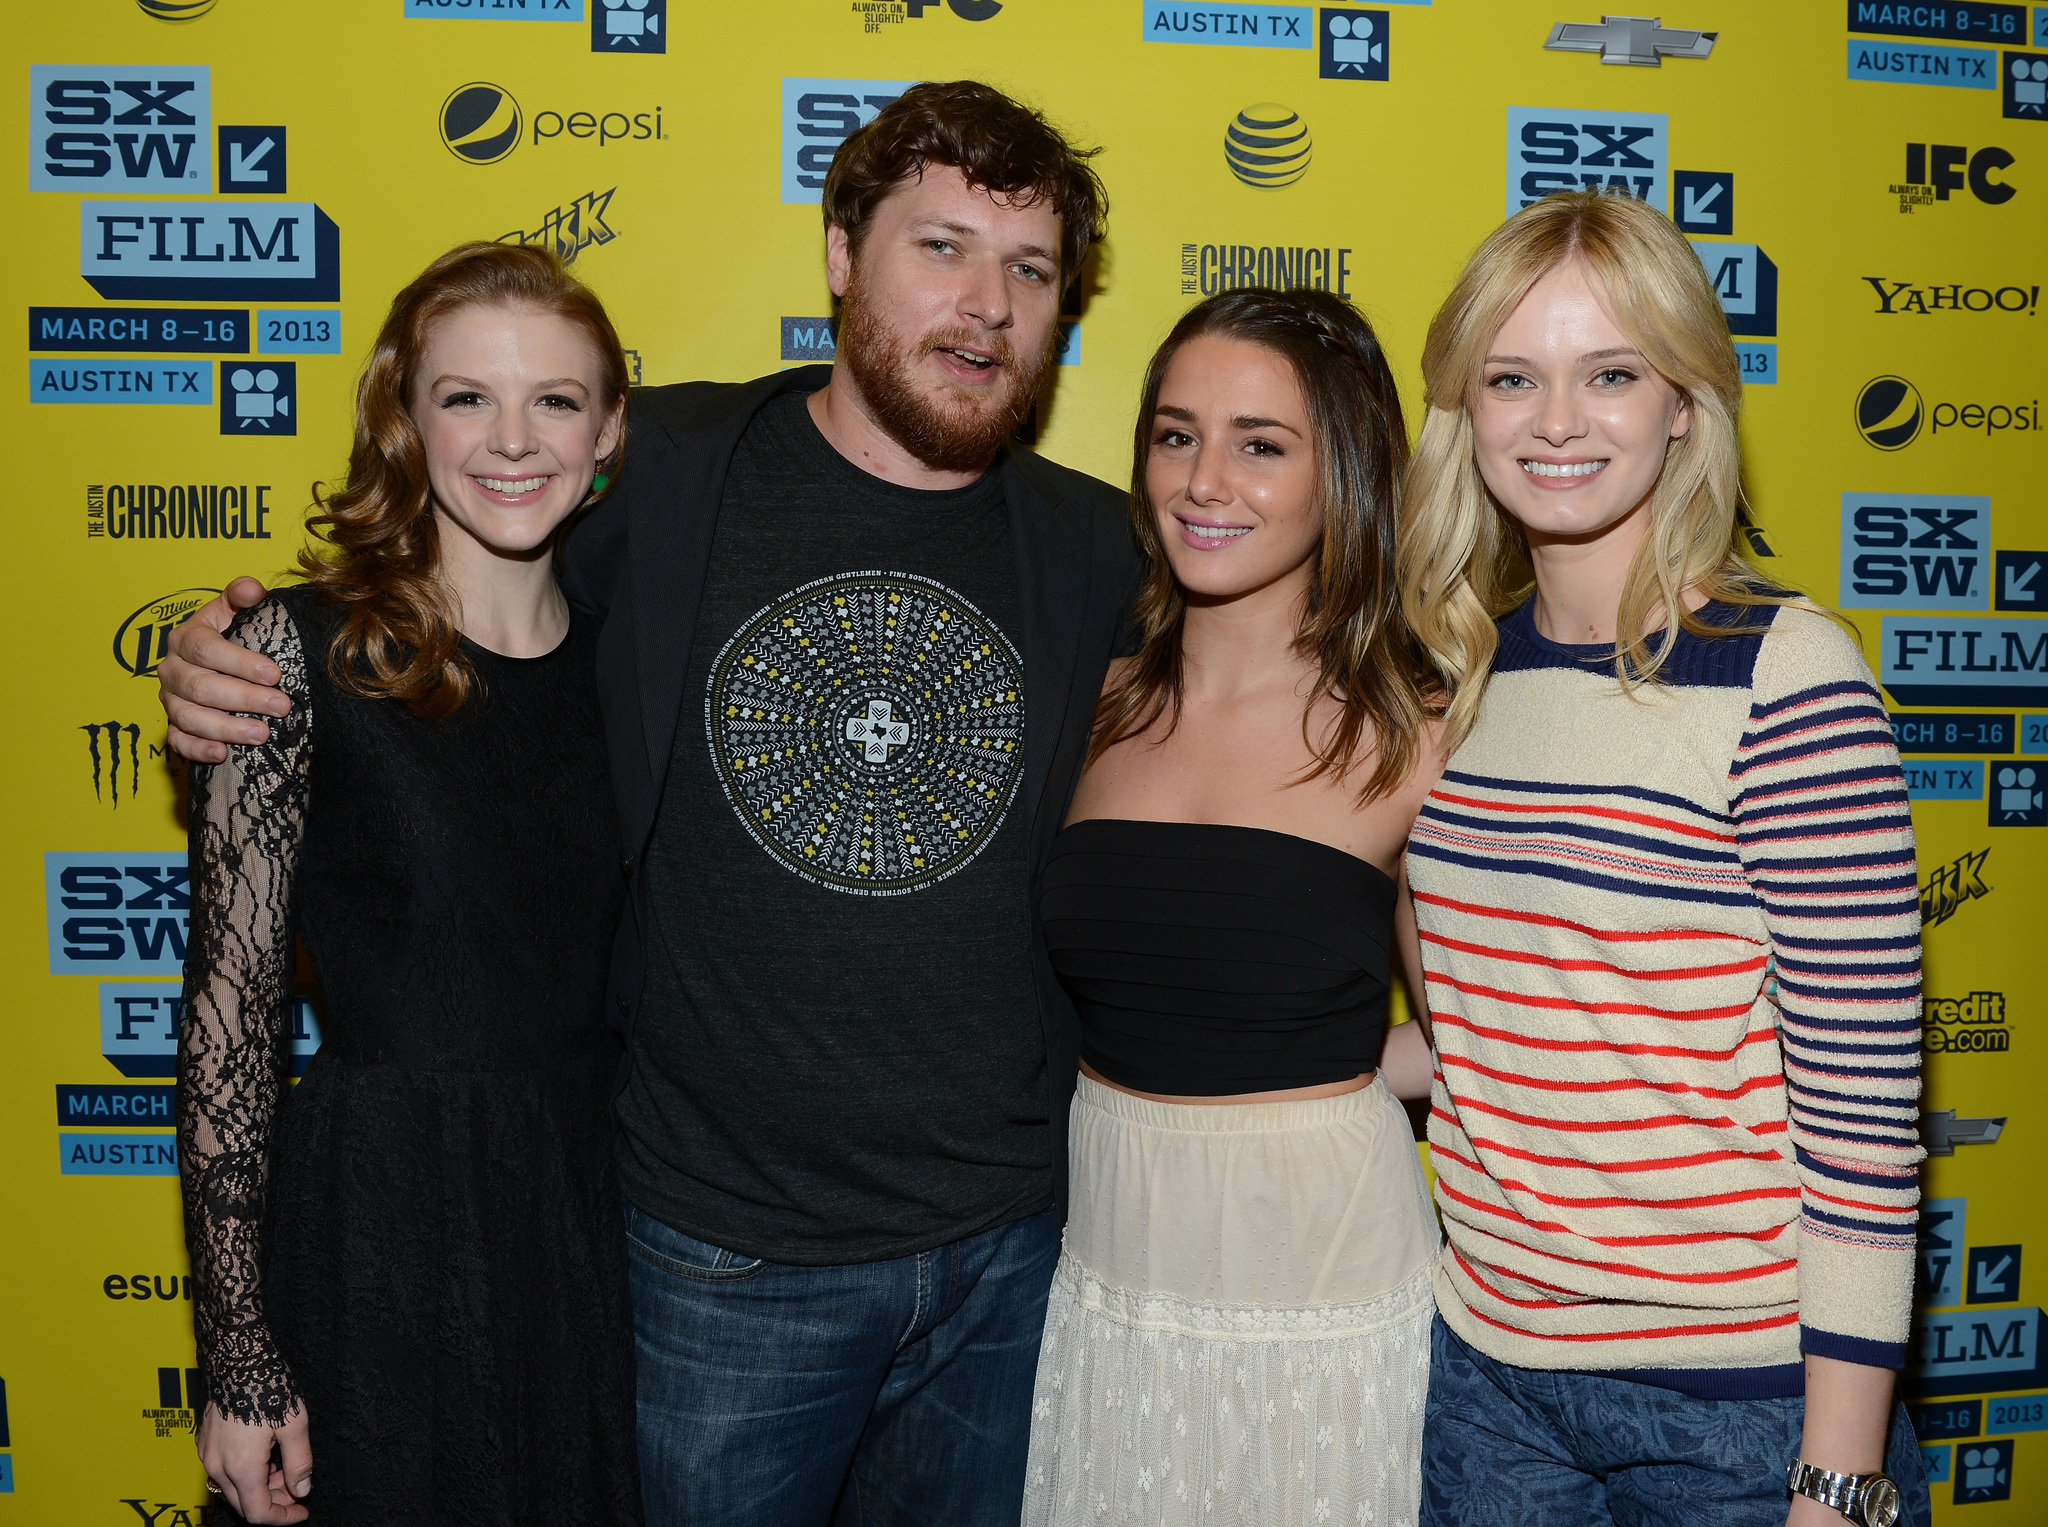 Ashley Bell, Sara Paxton, Bryan Poyser and Addison Timlin at event of The Bounceback (2013)